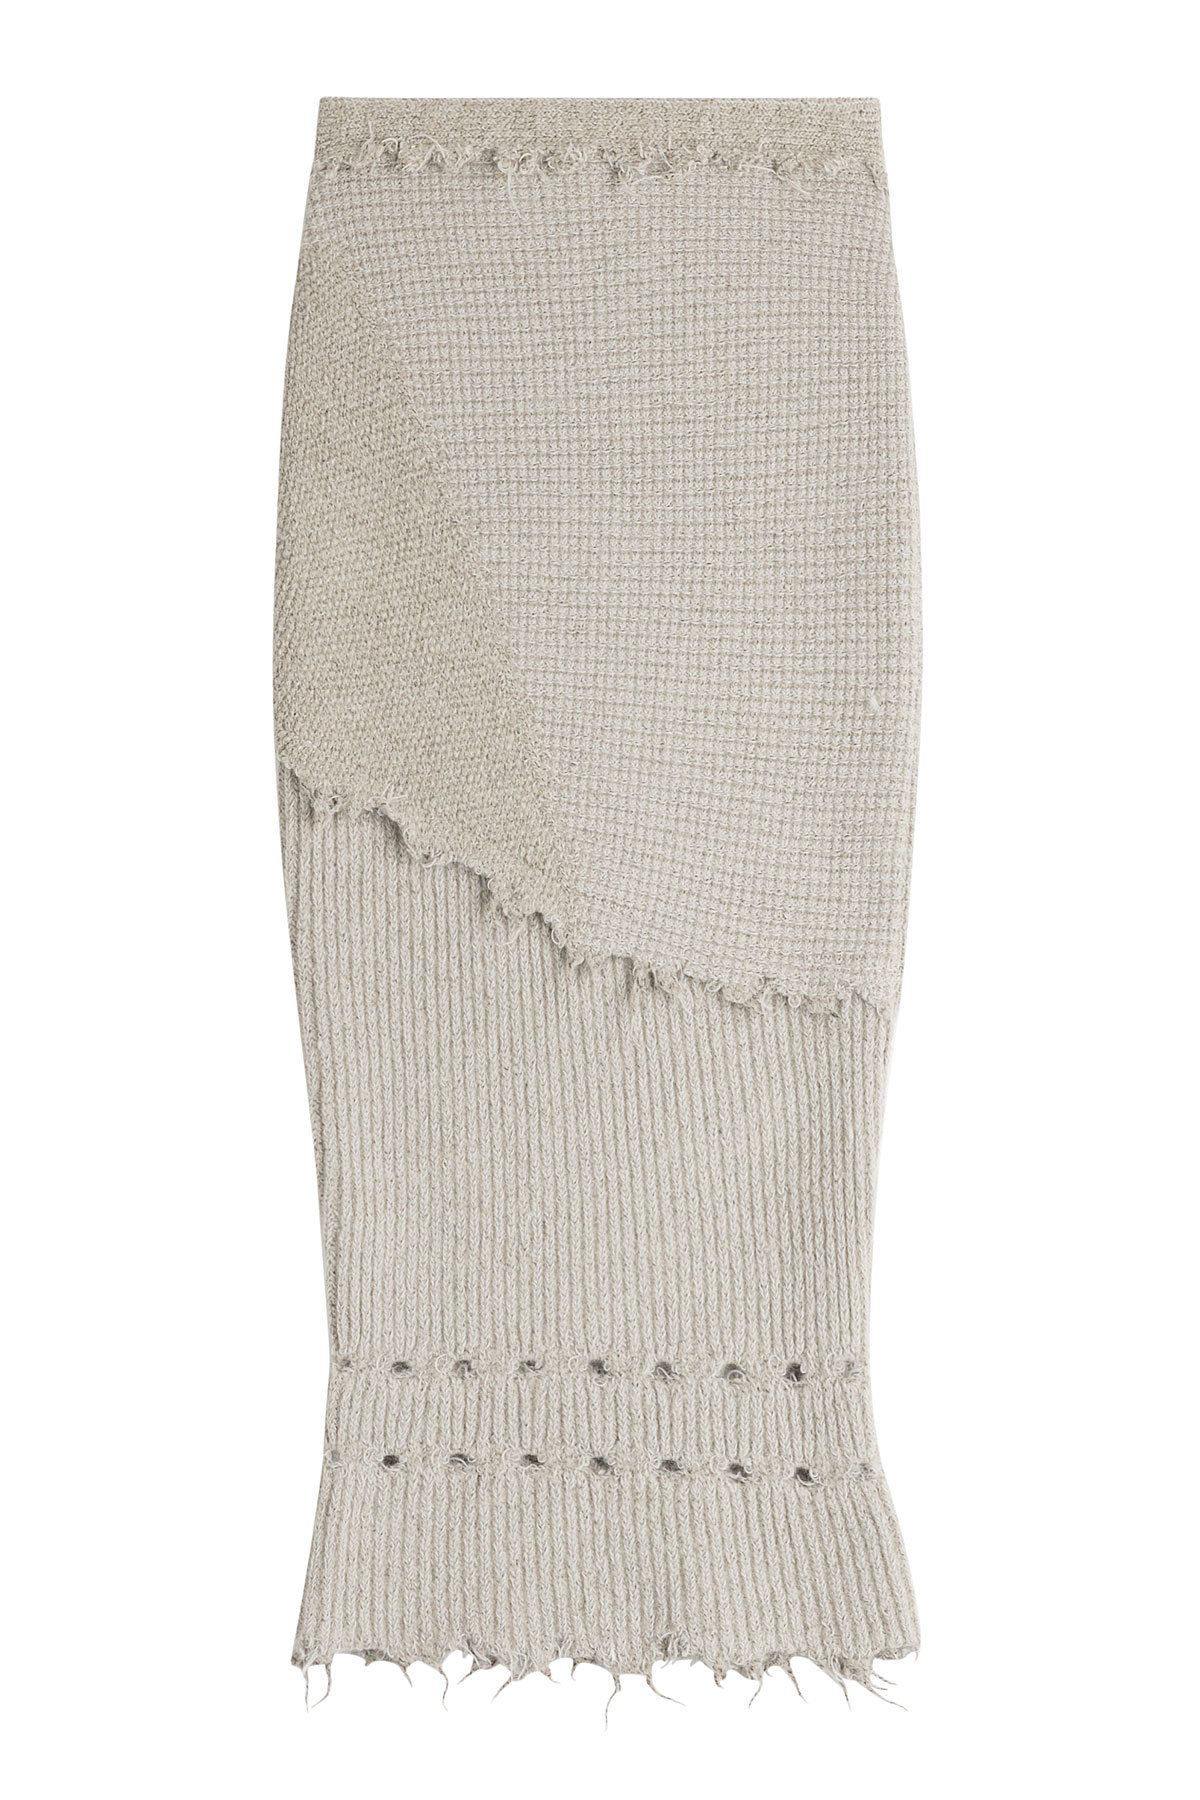 Damir Doma - Knit Skirt with Wool and Alpaca